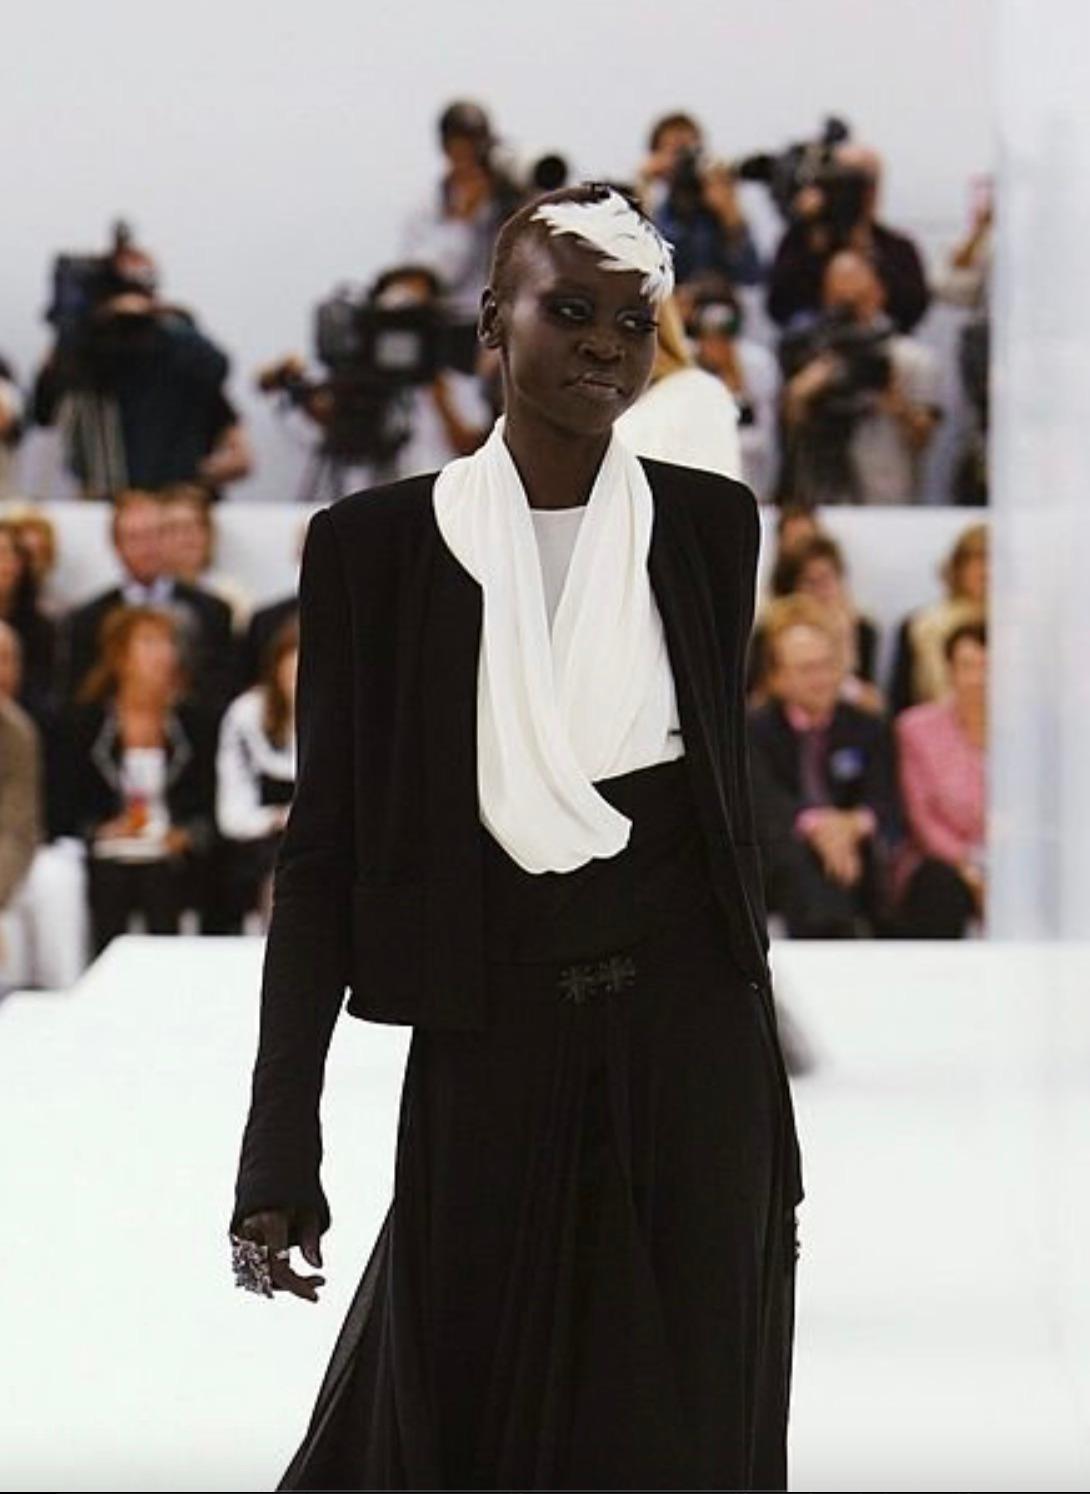 Introducing the iconic Little Black Jacket from Chanel Fall/Winter 2004 Haute Couture collection. Look #44, as seen on model Alek Wek. Boasting an open front, collarless design, and boxy cut, it combines elegance and versatility seamlessly. The